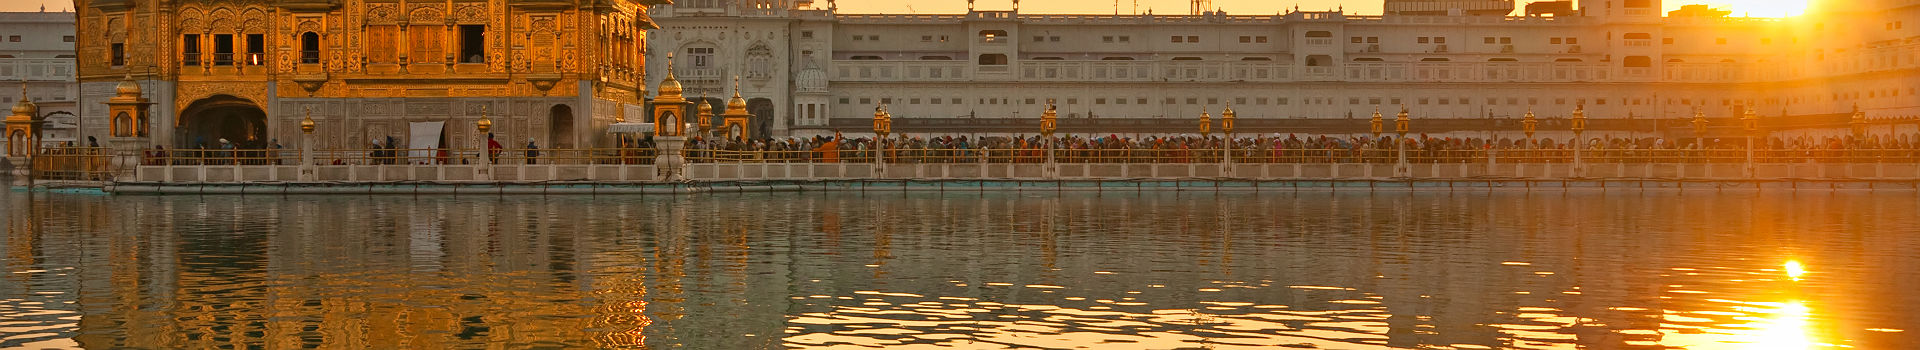 Le Temple d'or d'Amritsar - Inde